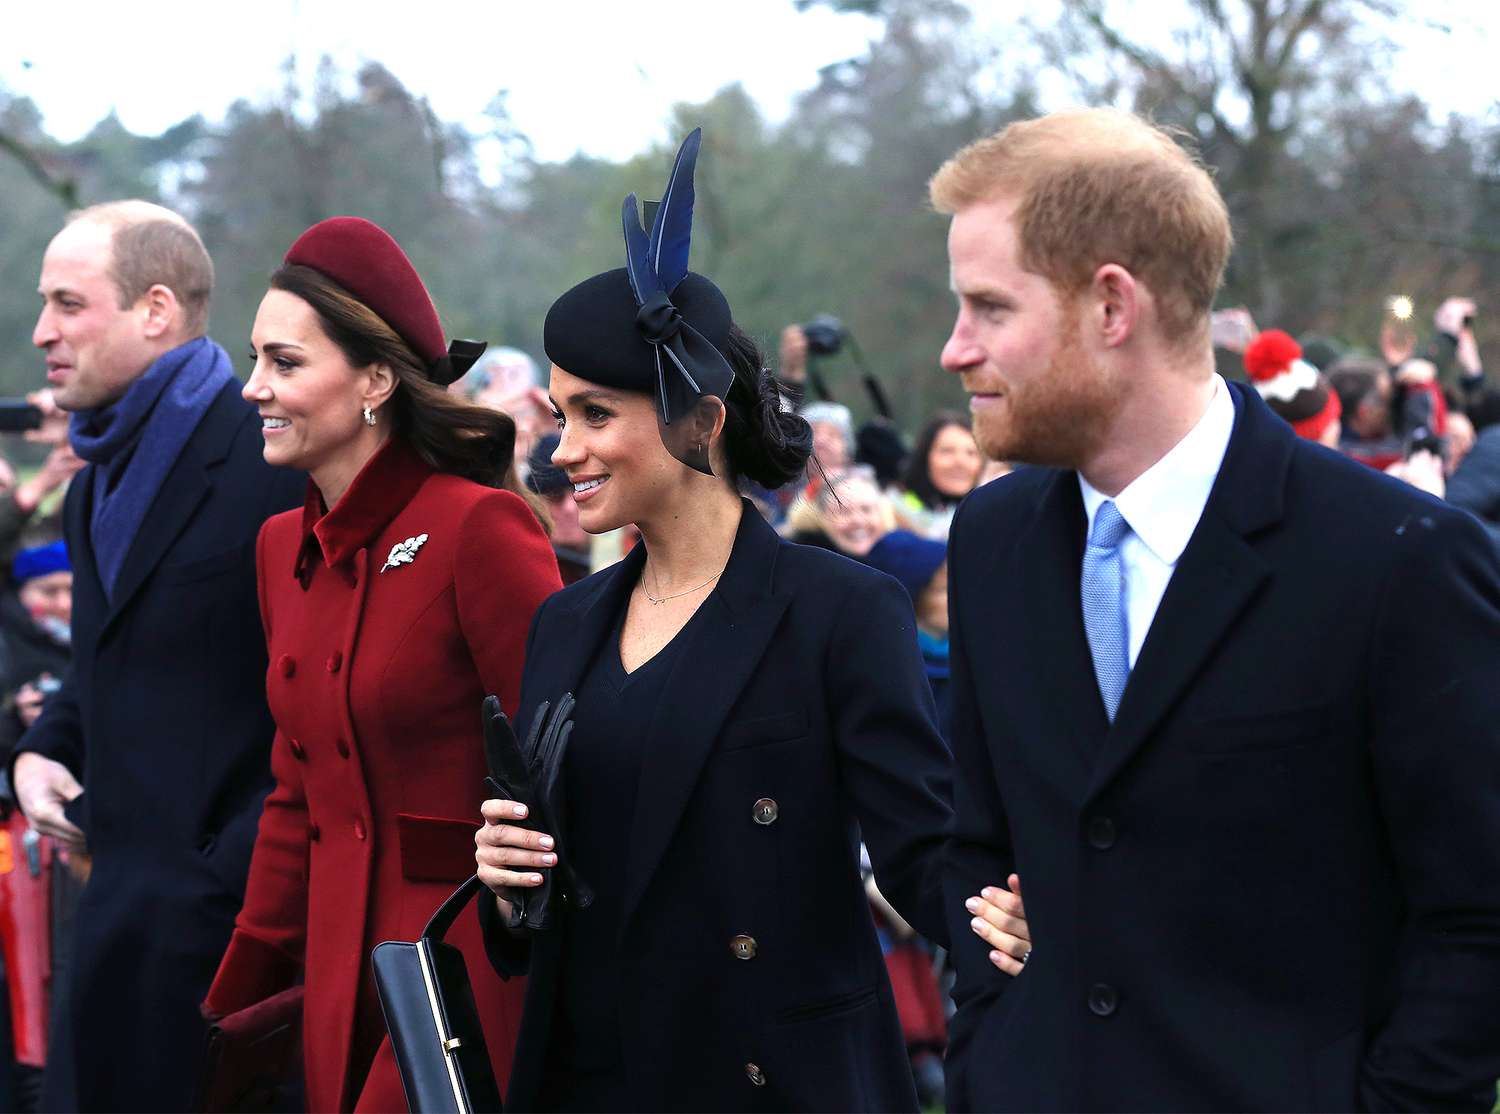 Prince William; Kate, Duchess of Cambridge; Meghan, Duchess of Sussex; and Prince Harry